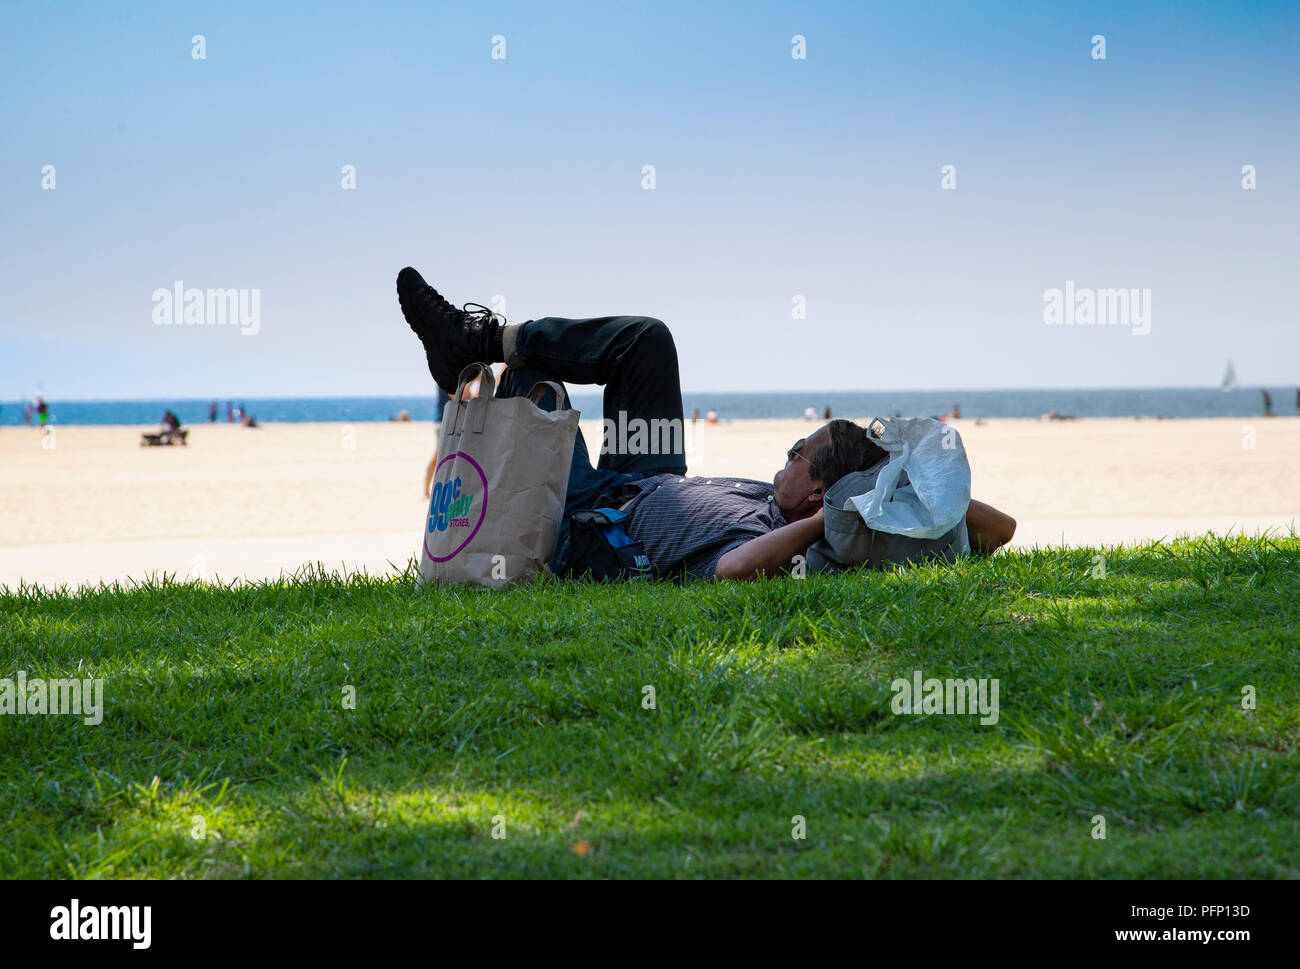 Man relaxing by the Beach in California Stock Photo